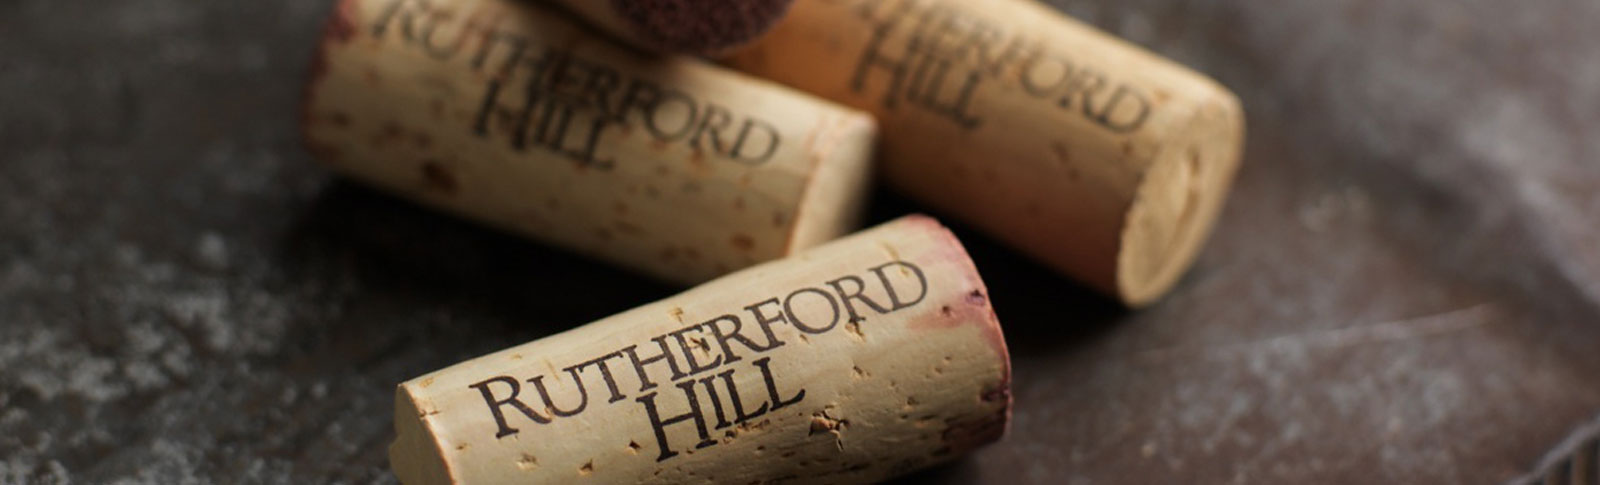 About Rutherford Hill and the Terlato Family